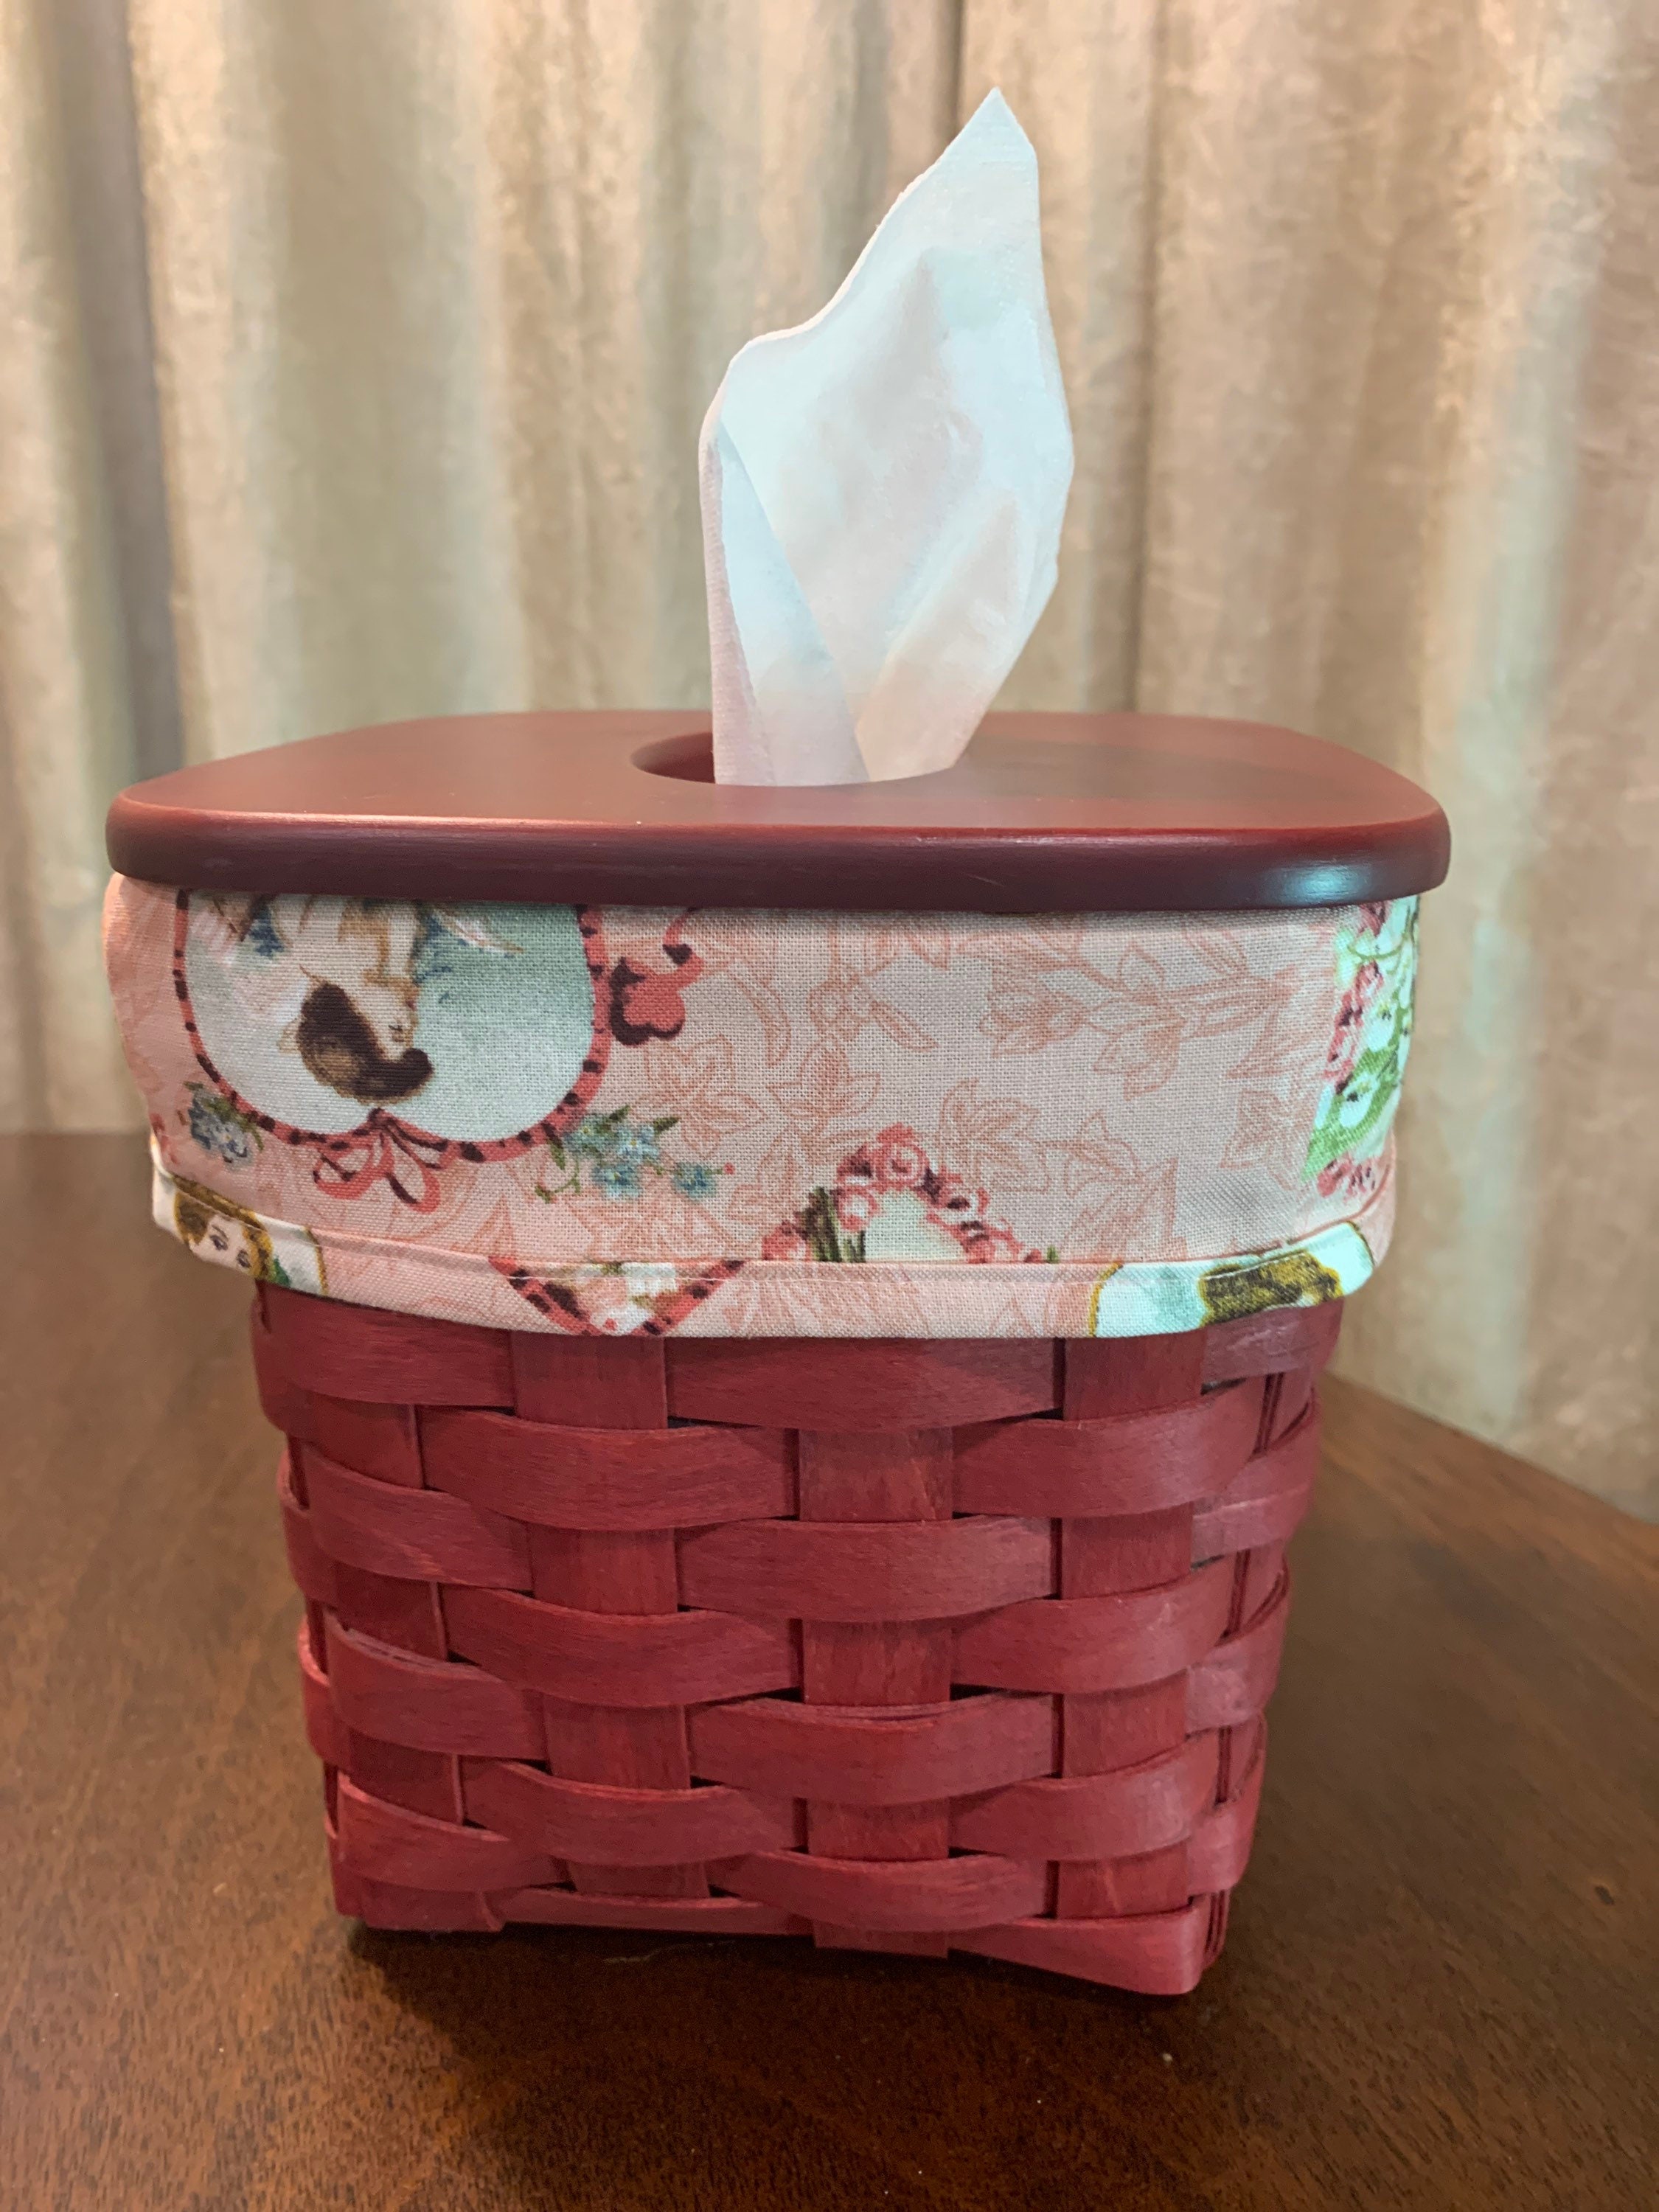 New! Tall Tissue Basket Liner from Longaberger Botanical Fields fabric 